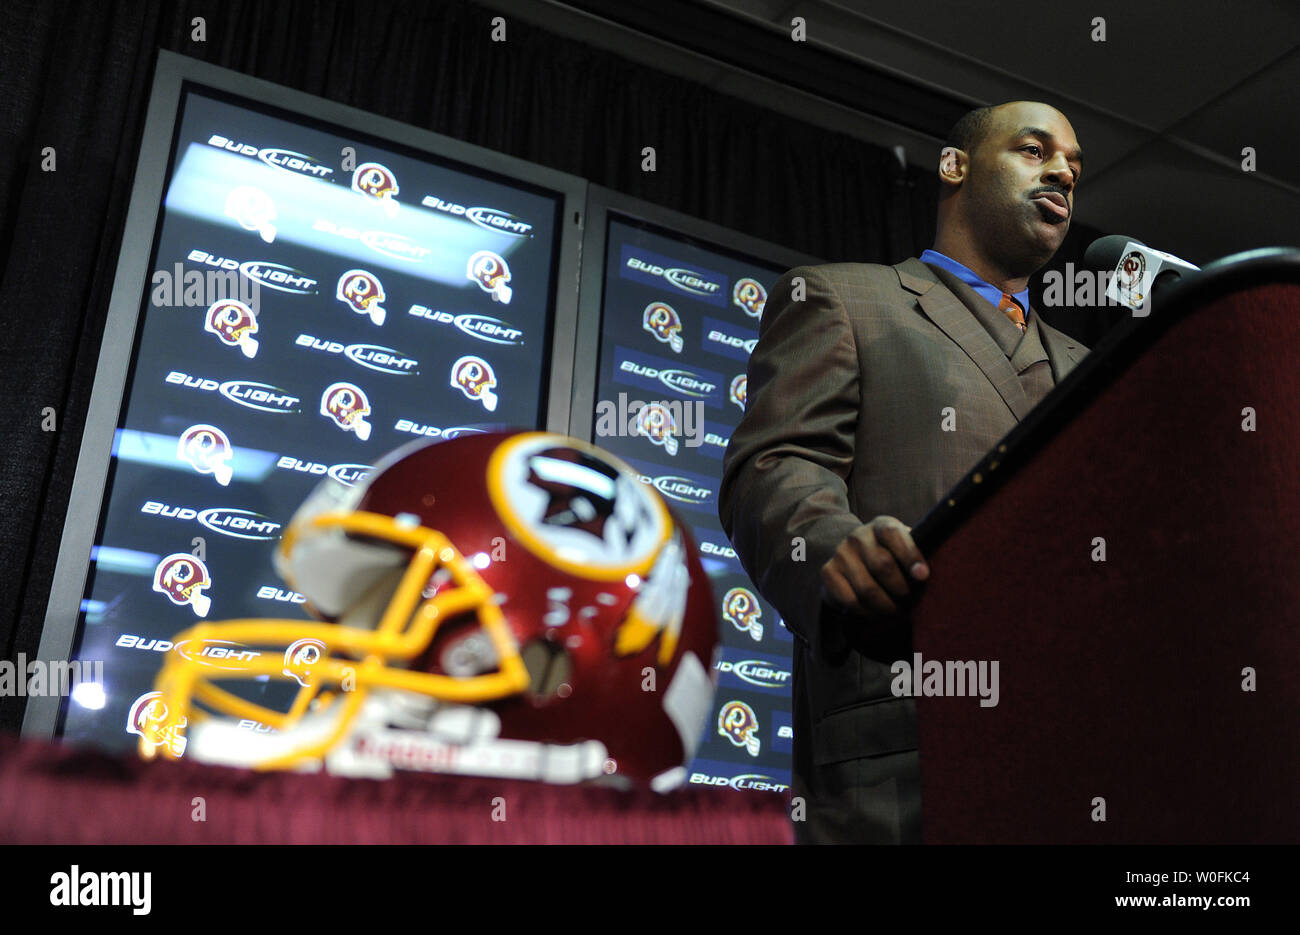 Washington Redskins new quarterback Donovan McNabb speaks to the media after being introduced by head coach Mike Shanahan, at a press conference at Redskins Park in Ashburn, Virginia on April 6, 2010. The Philadelphia Eagles traded McNabb to the Washington Redskins for a pair of draft picks in the upcoming NFL draft. UPI/Kevin Dietsch Stock Photo